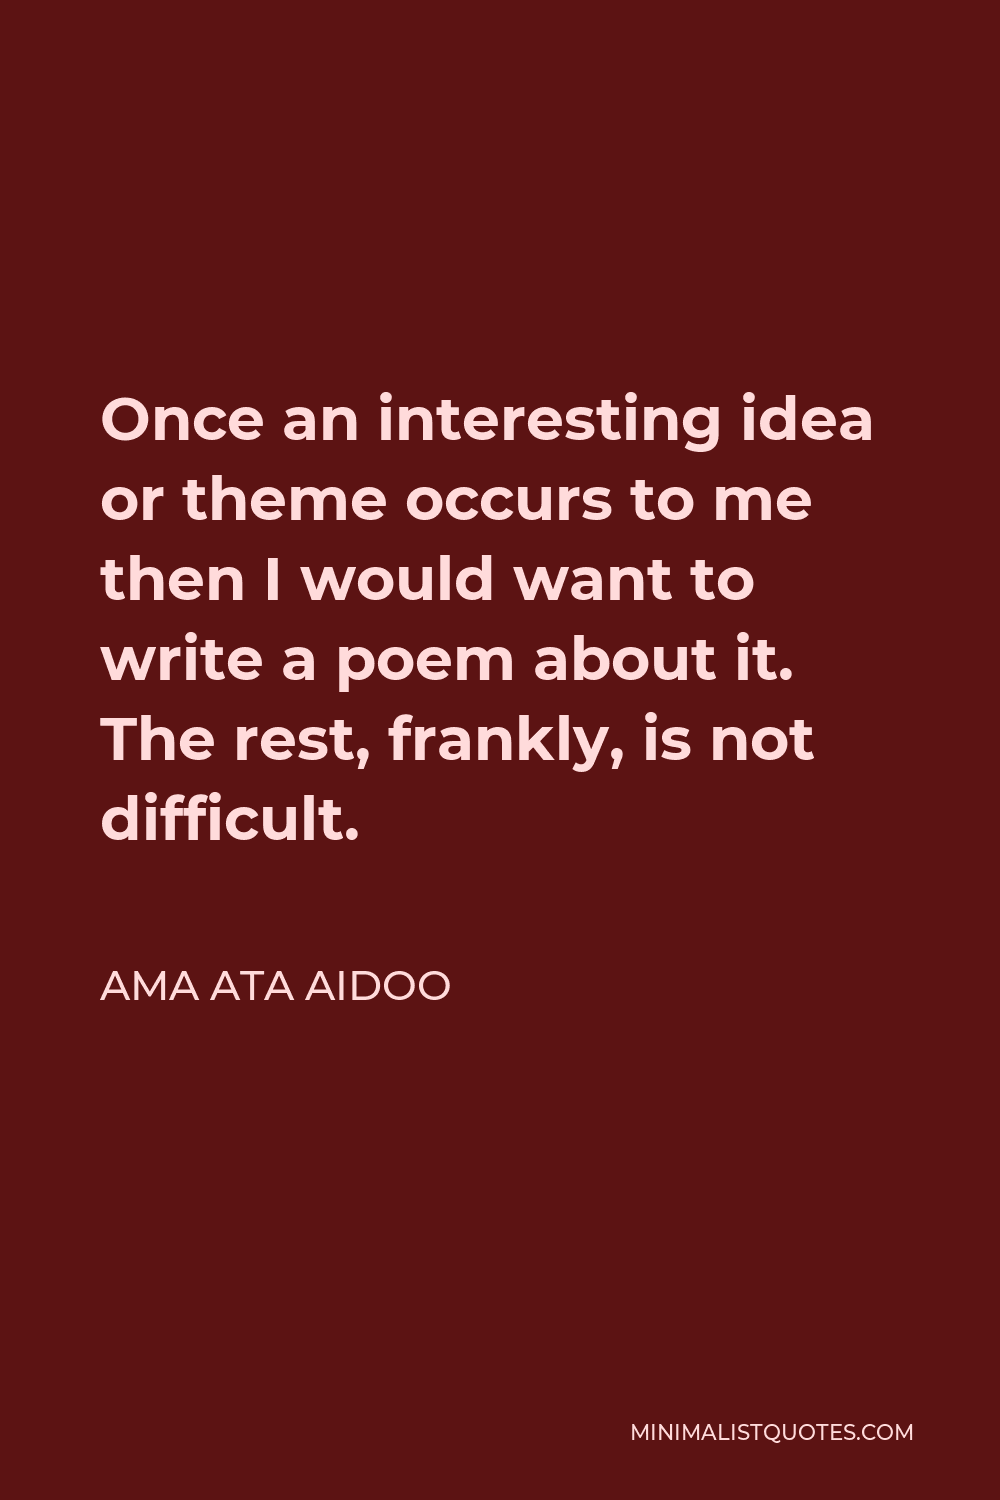 Ama Ata Aidoo Quote - Once an interesting idea or theme occurs to me then I would want to write a poem about it. The rest, frankly, is not difficult.